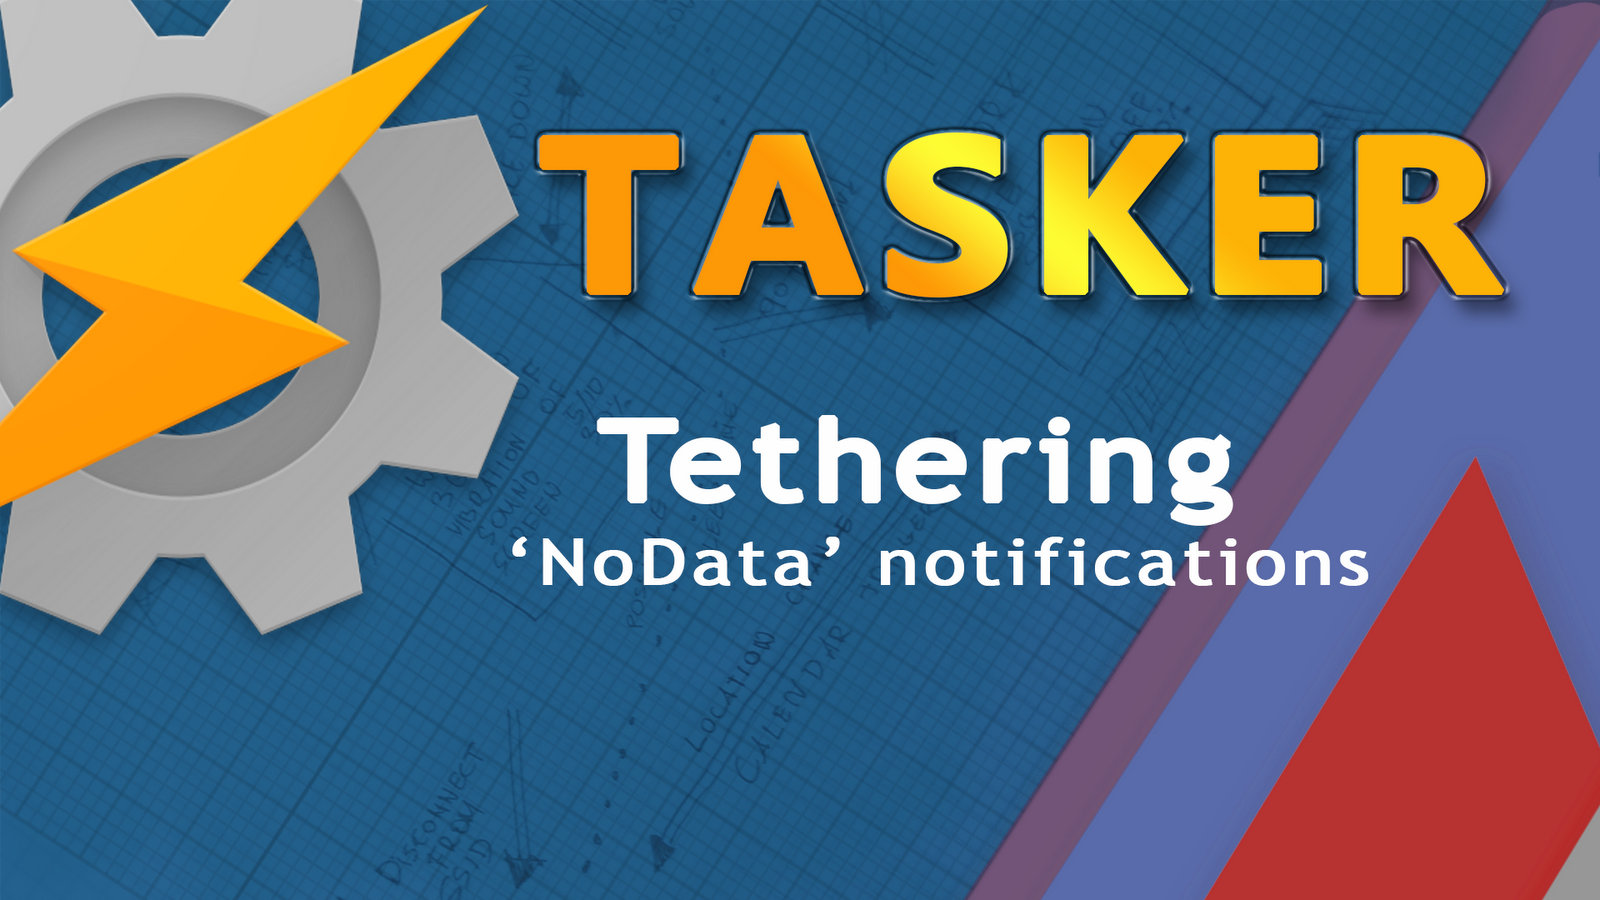 nummer middag Whirlpool Create 'no data' tethering warning with Tasker - NotEnoughTech